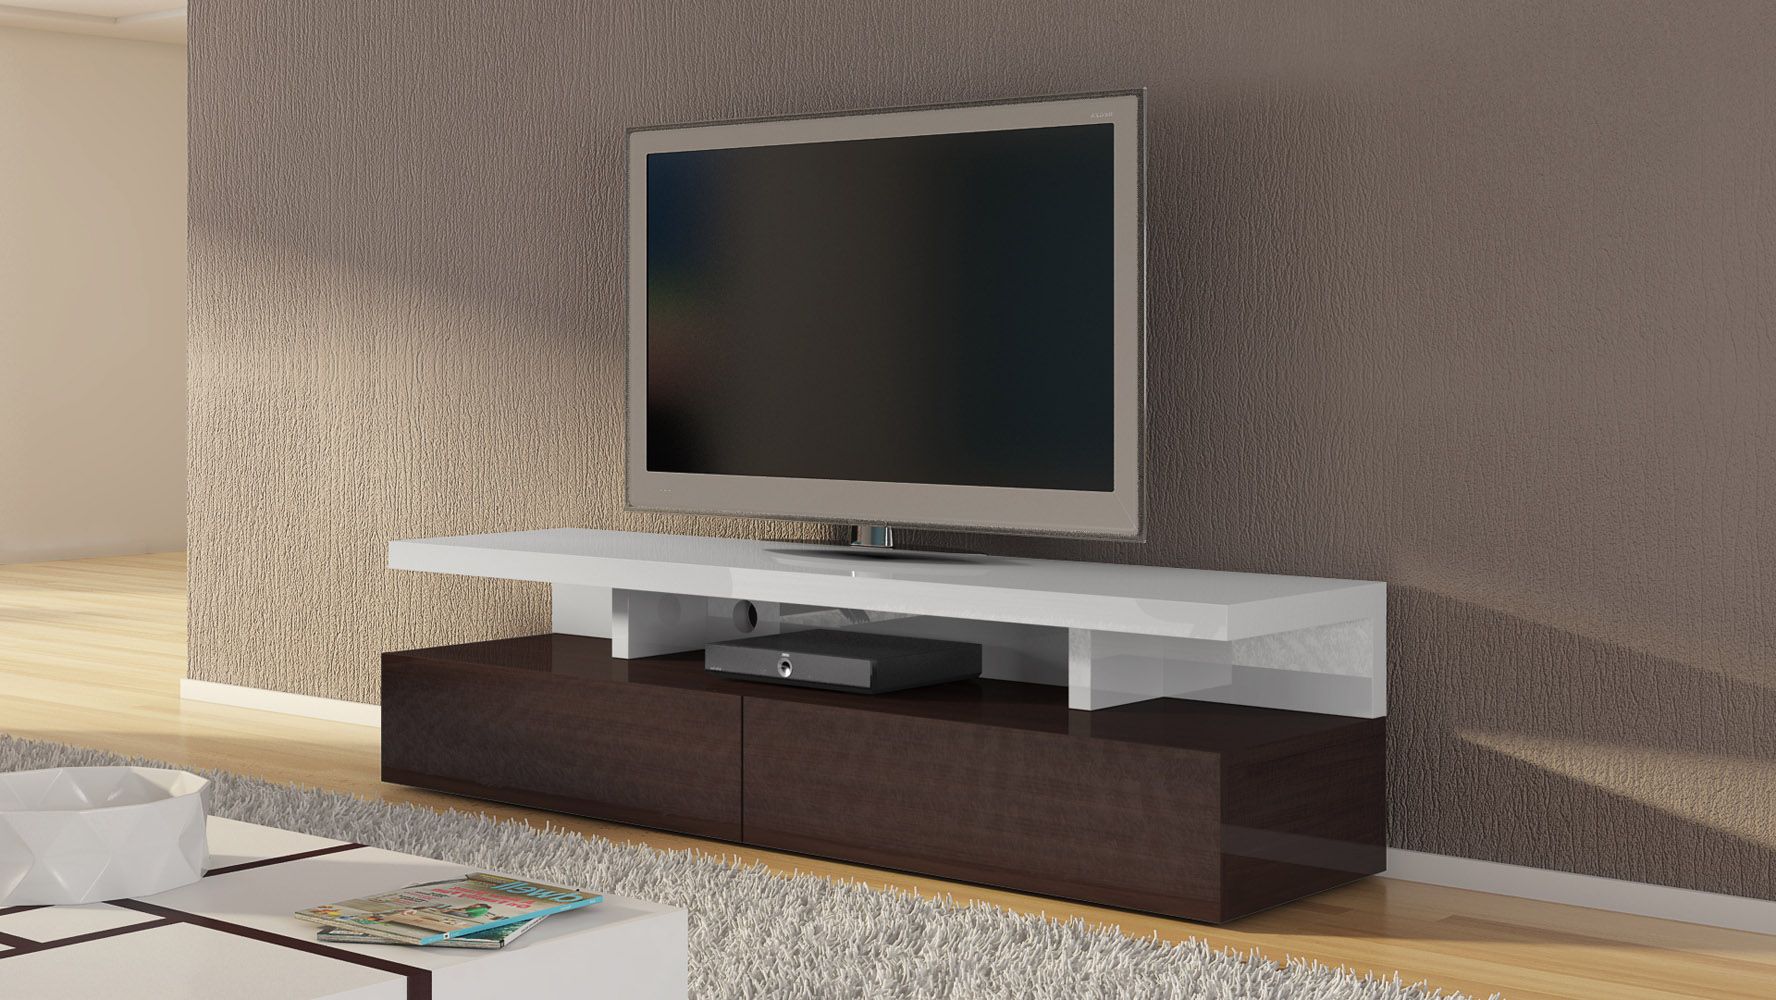 Mcintosh 71 Inch Tv Stand In White High Gloss And Ebony Pertaining To Tv Stands With 2 Open Shelves 2 Drawers High Gloss Tv Unis (View 3 of 20)